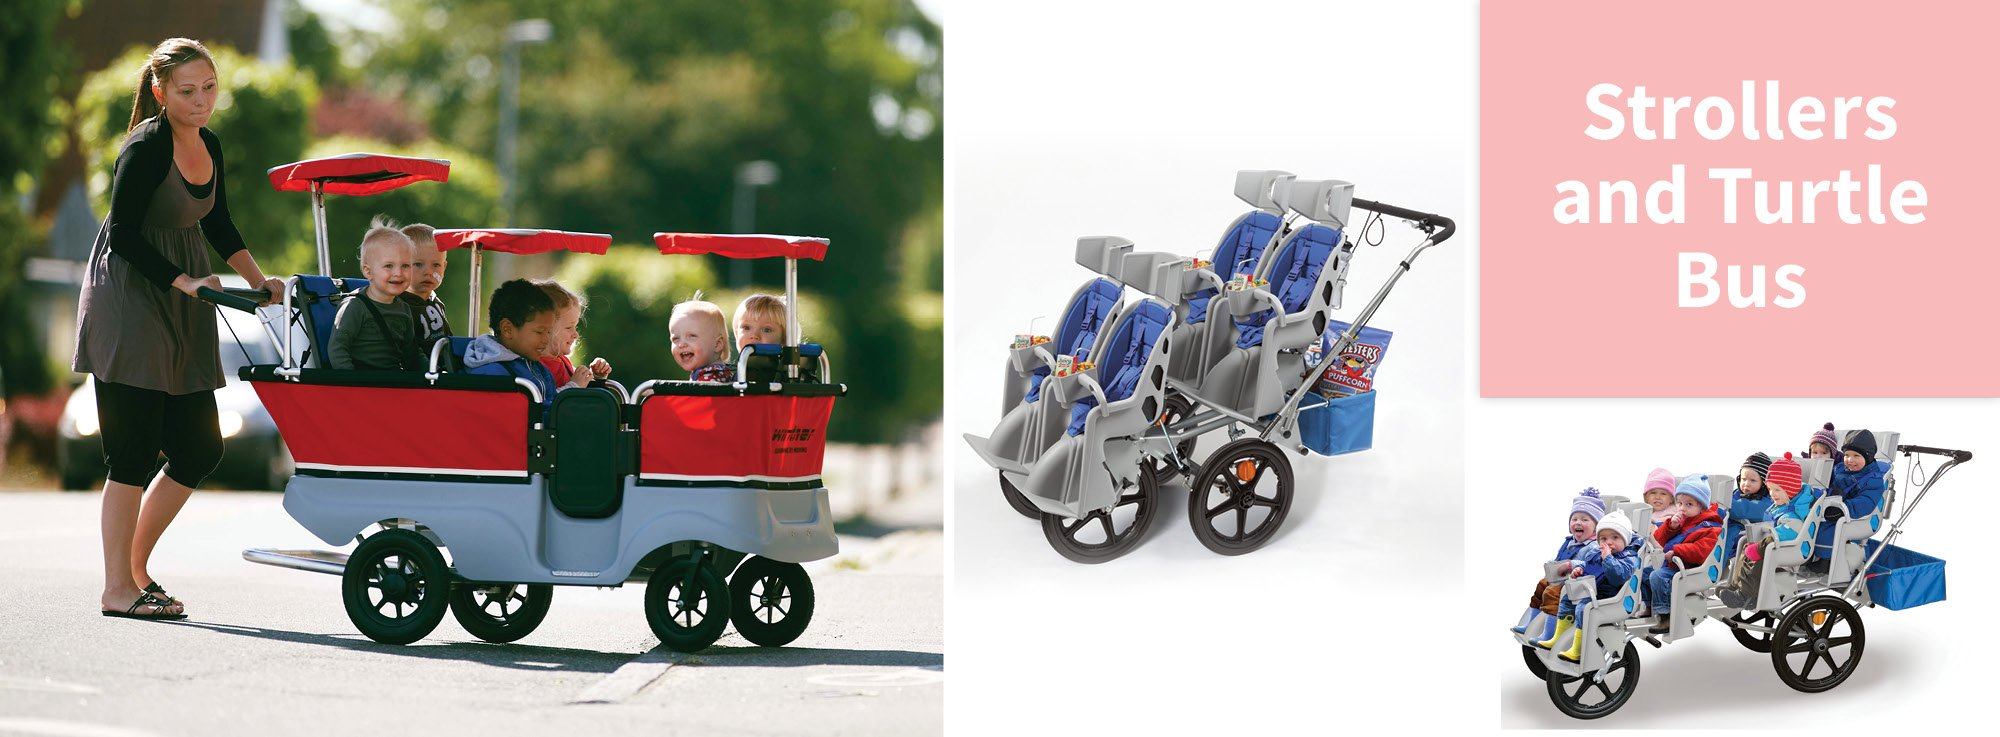 Strollers and Turtlebus